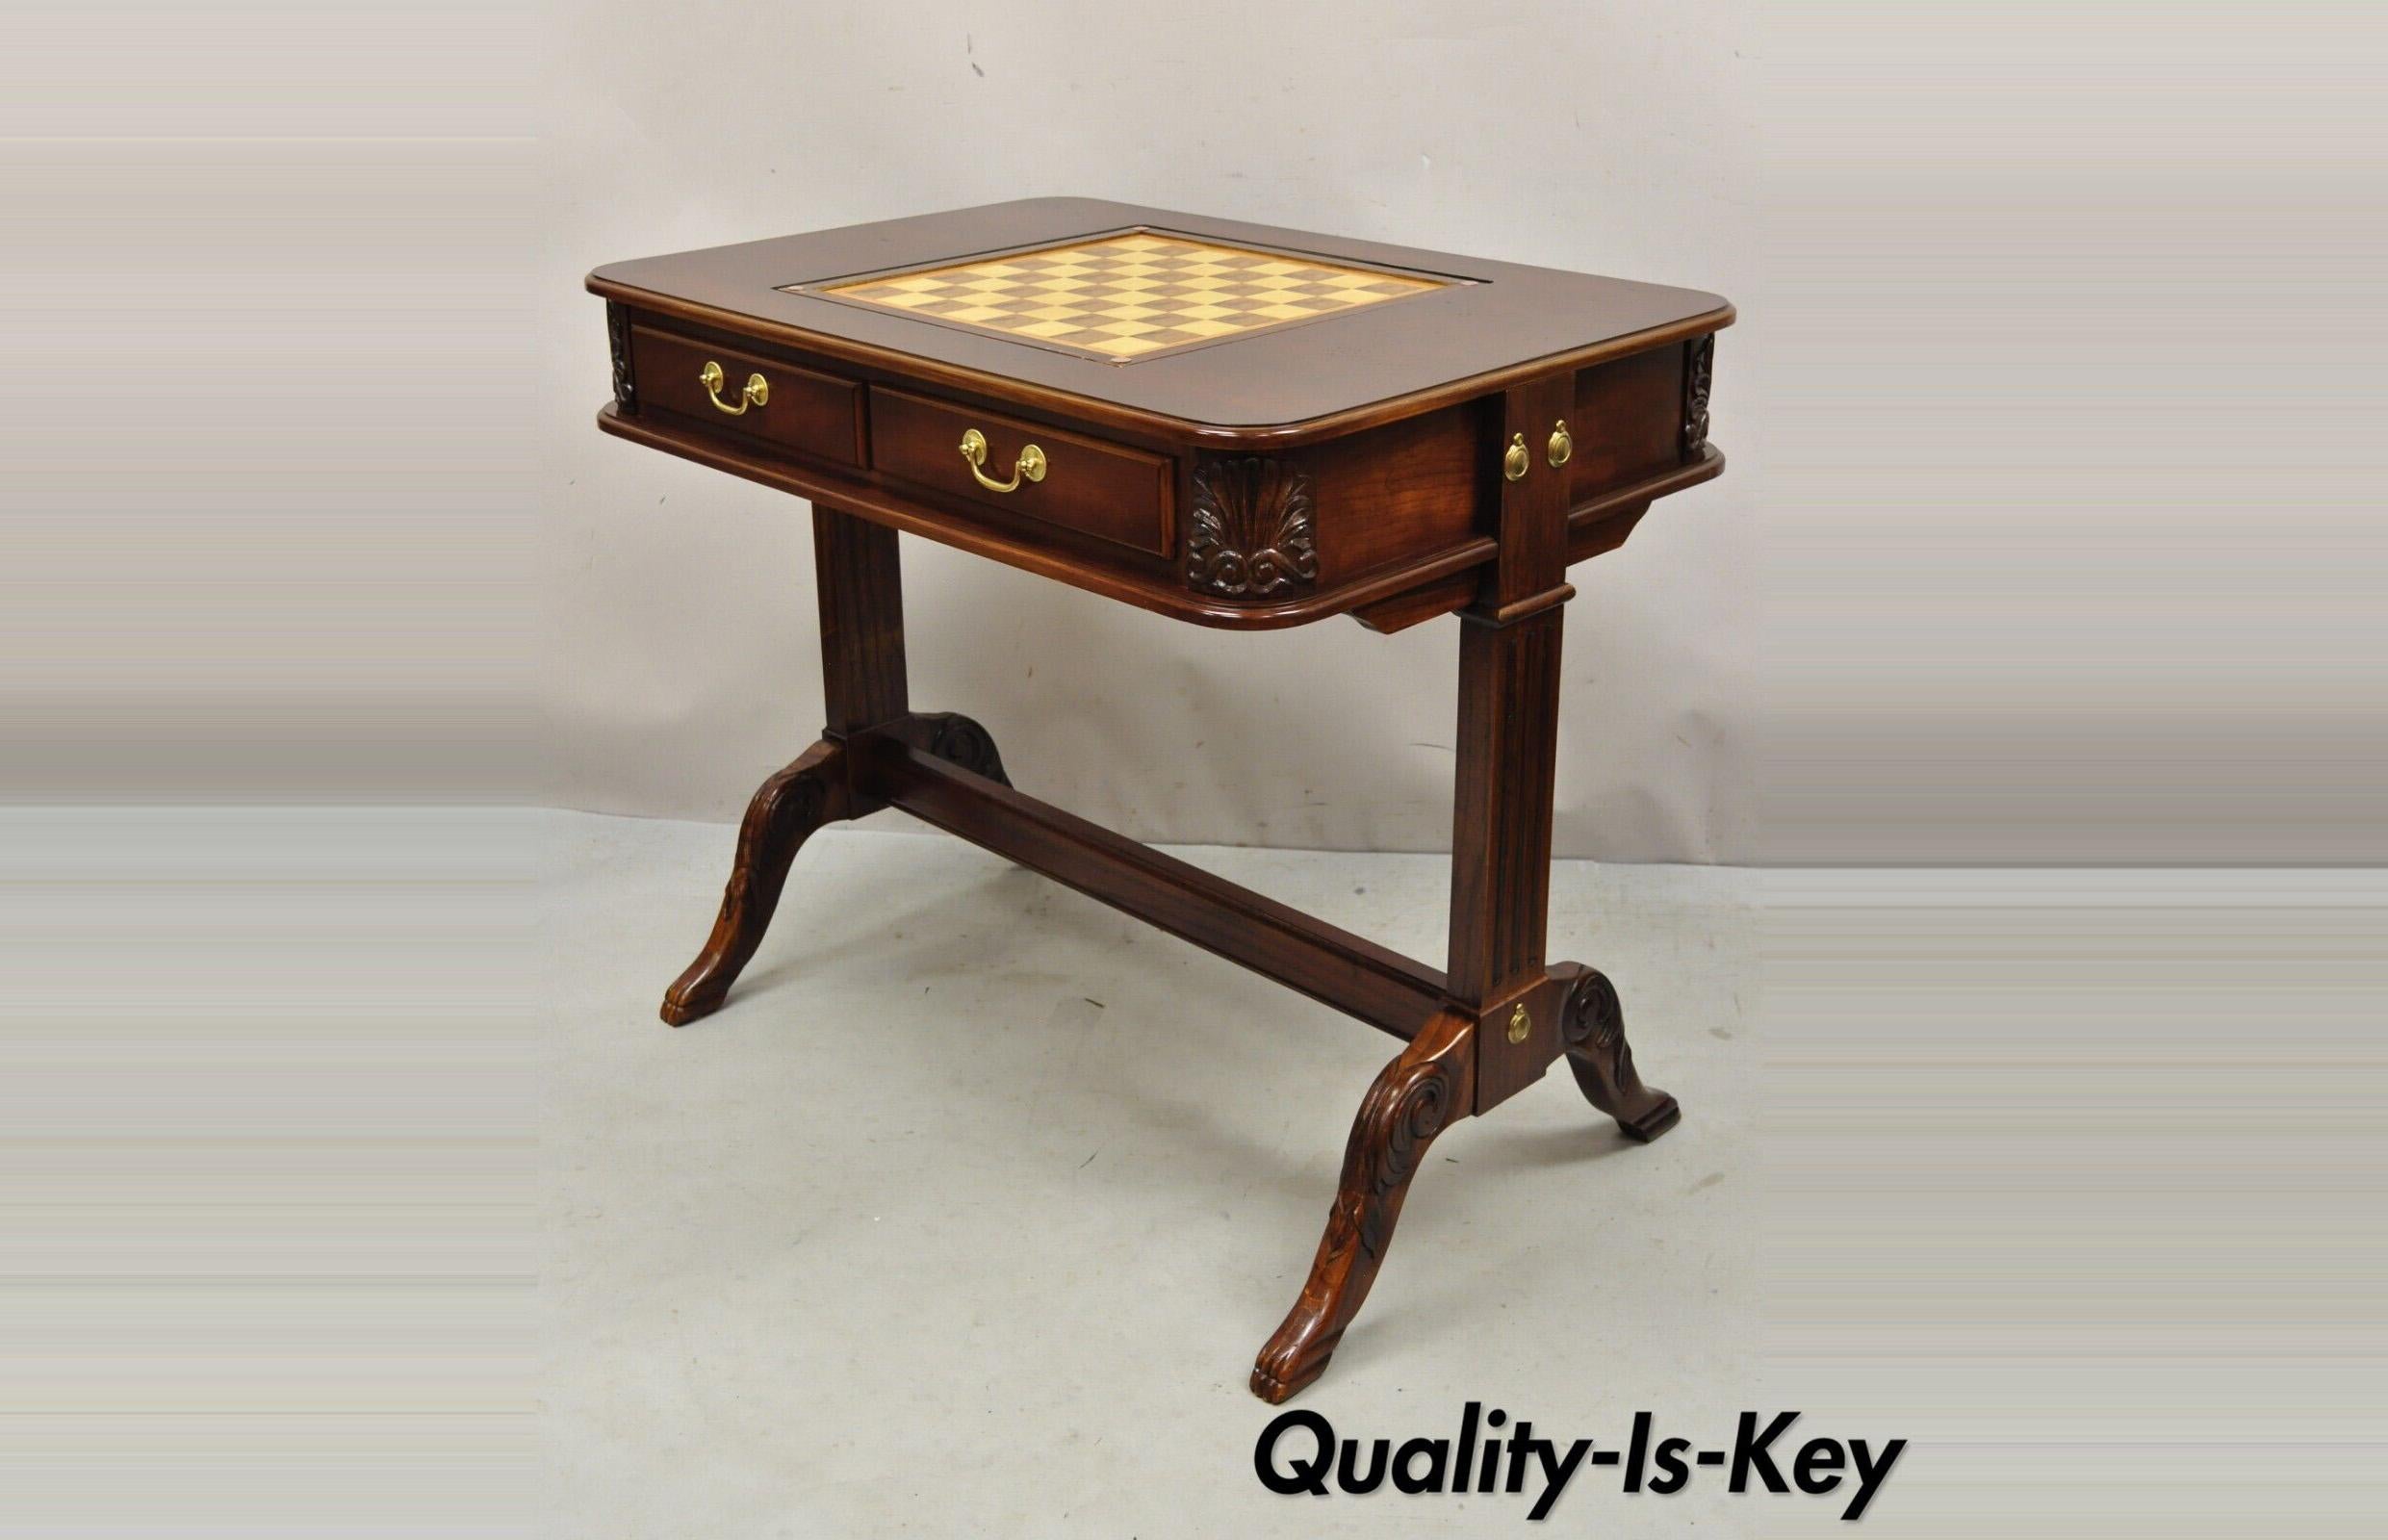 Regency Style Cherry Wood game table with flip top by Butler Specialty. Item features flip top with chess/checkerboard and backgammon, beautiful wood grain, nicely carved details, original label, 2 drawers, great style and form. Circa Late 20th